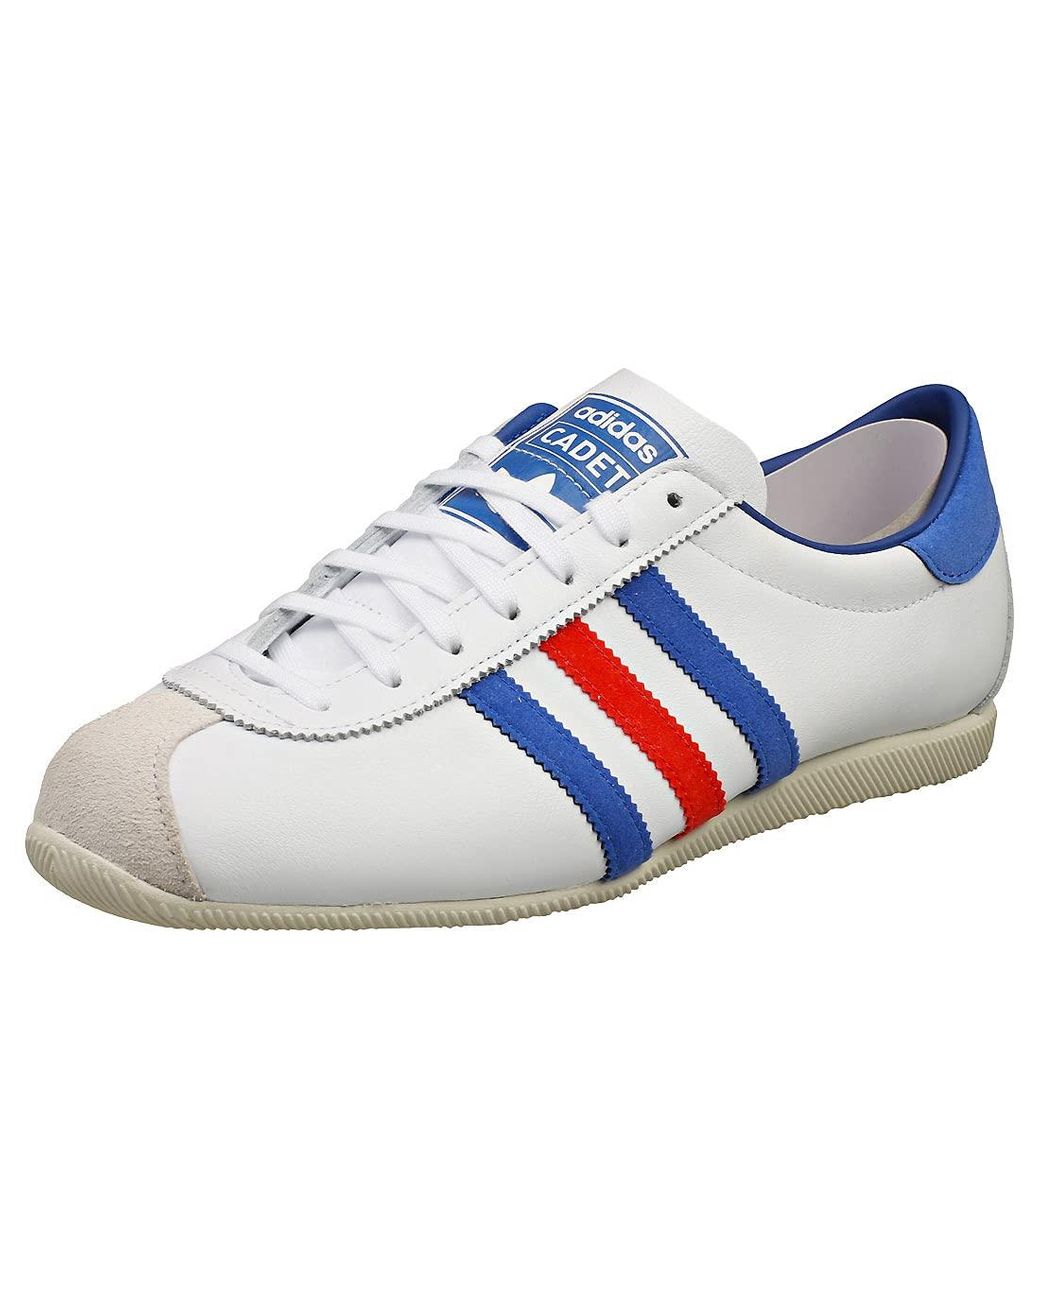 adidas Cadet Trainers - Wit/blauw/rood in het Wit | Lyst NL